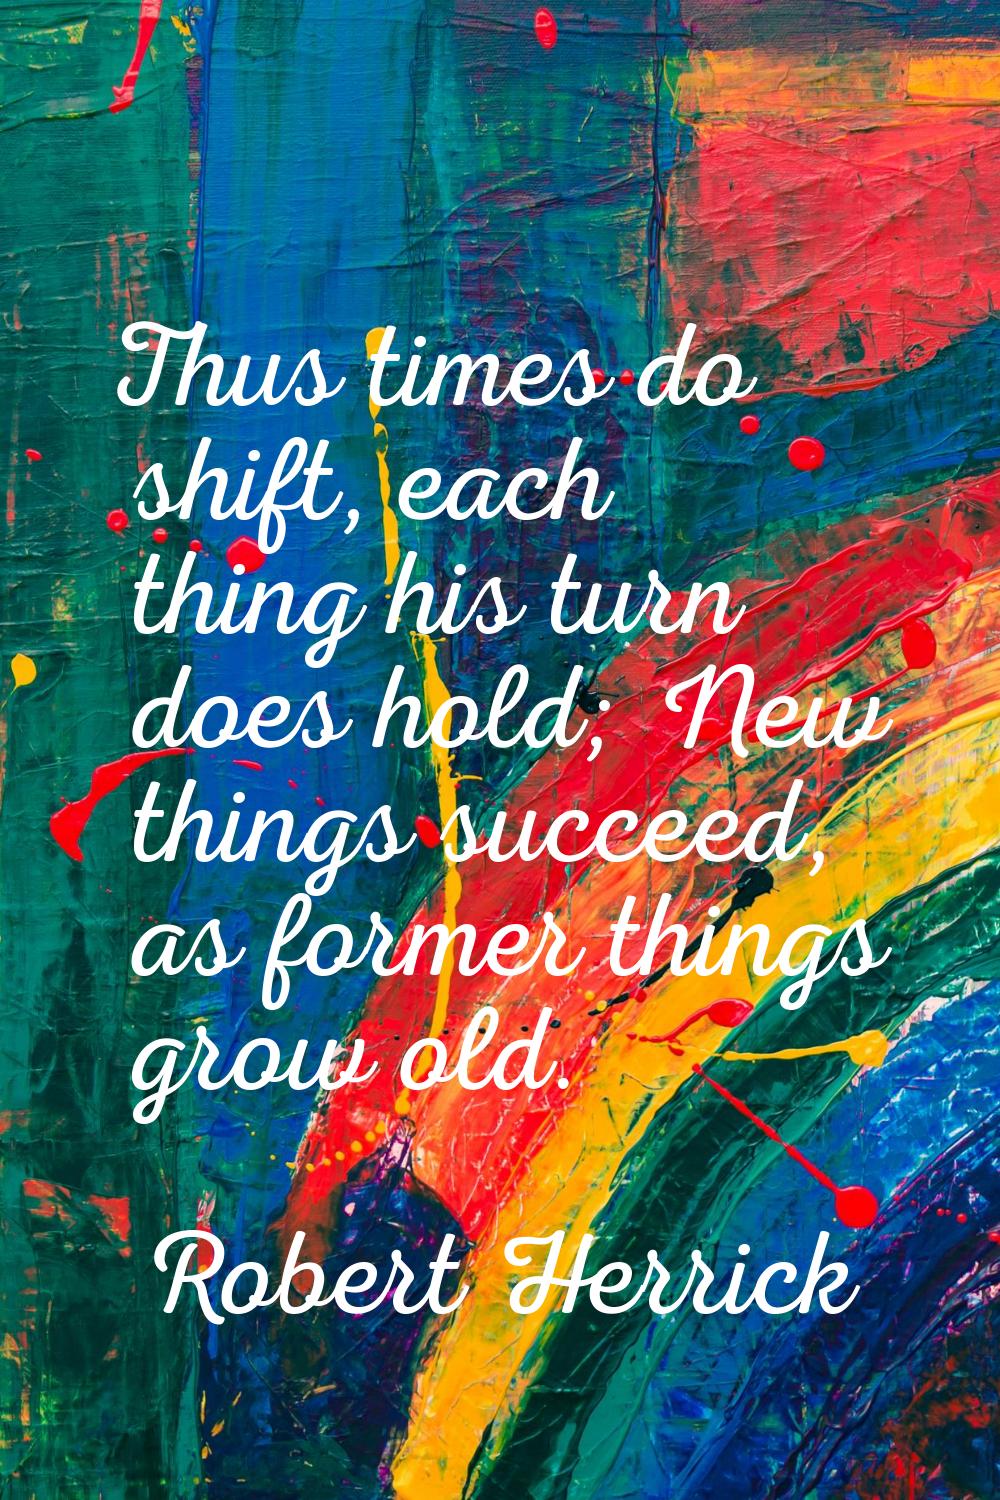 Thus times do shift, each thing his turn does hold; New things succeed, as former things grow old.